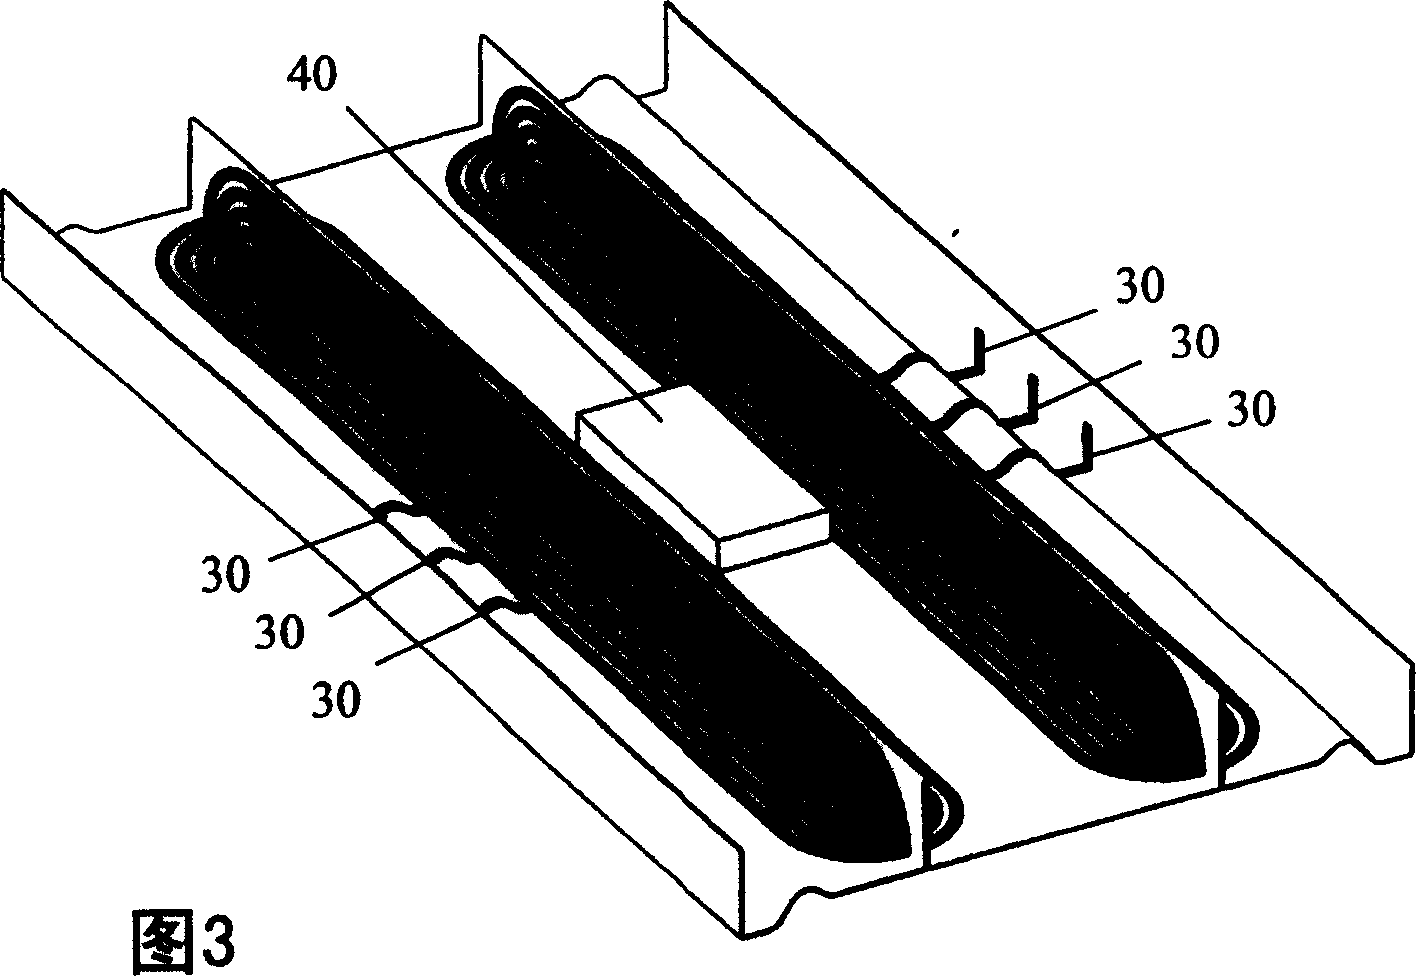 Flexible diaphragm with integrated coil